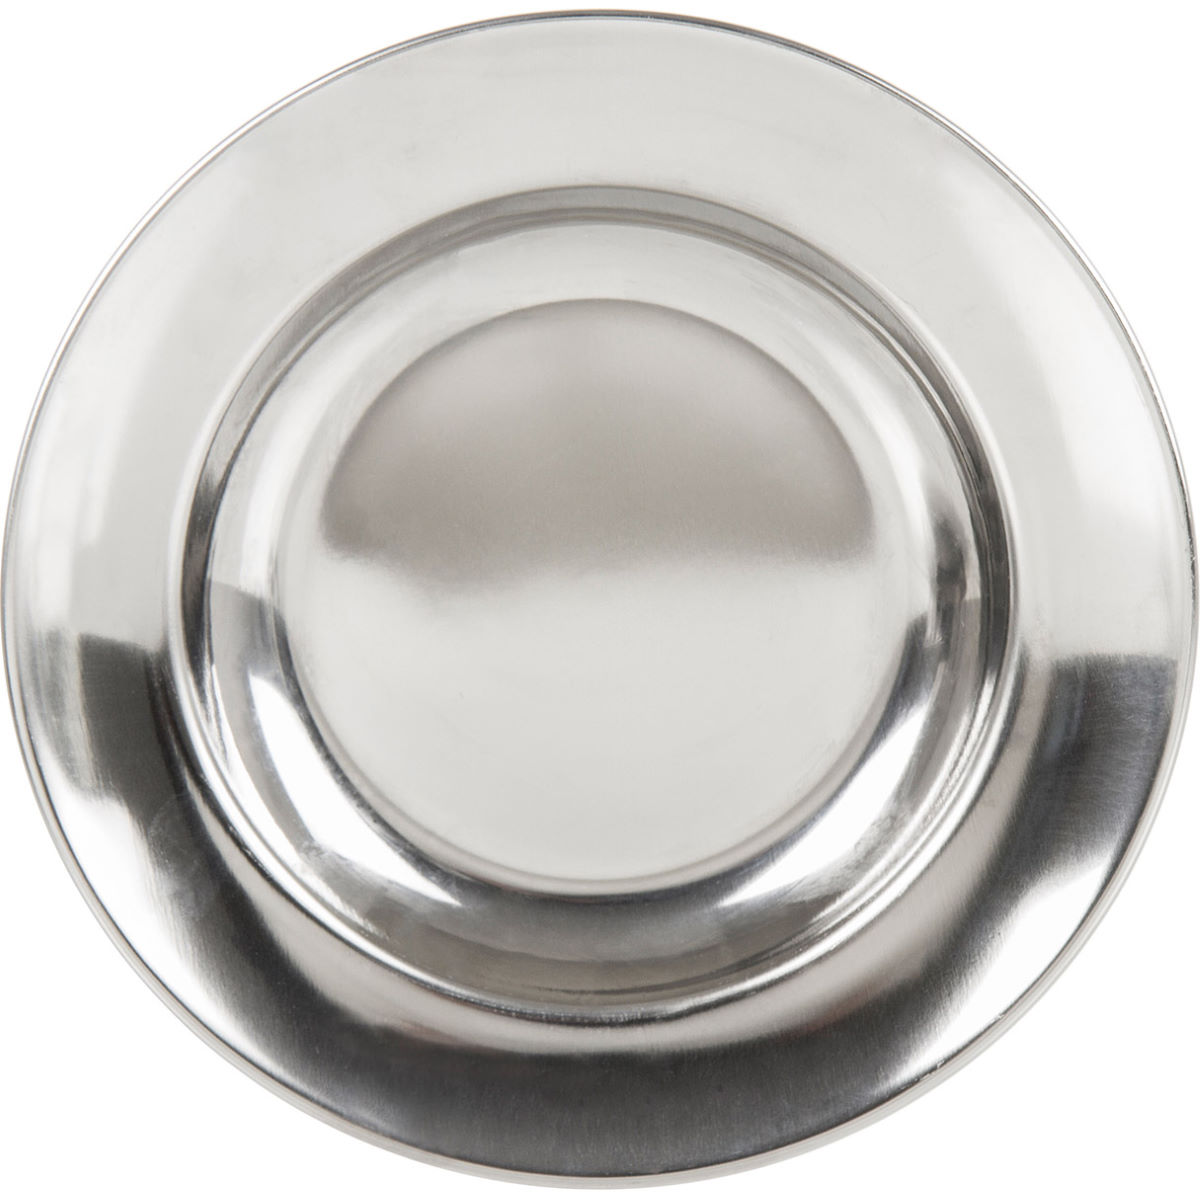 Lifeventure Stainless Steel Camping Plate - Vajilla